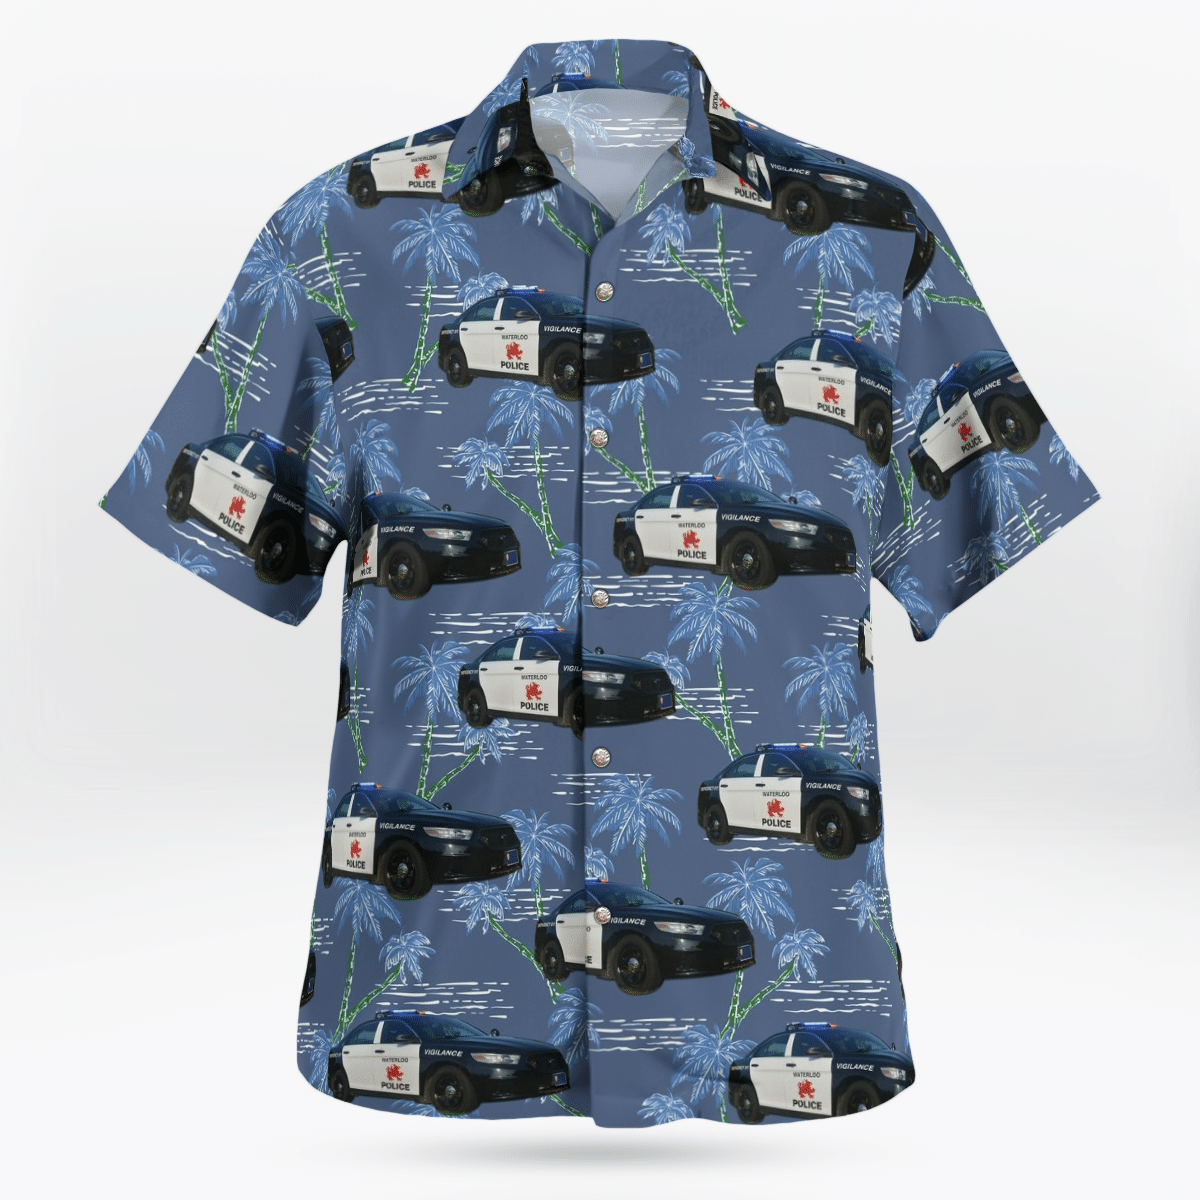 Hawaiian shirts never go out of style 214